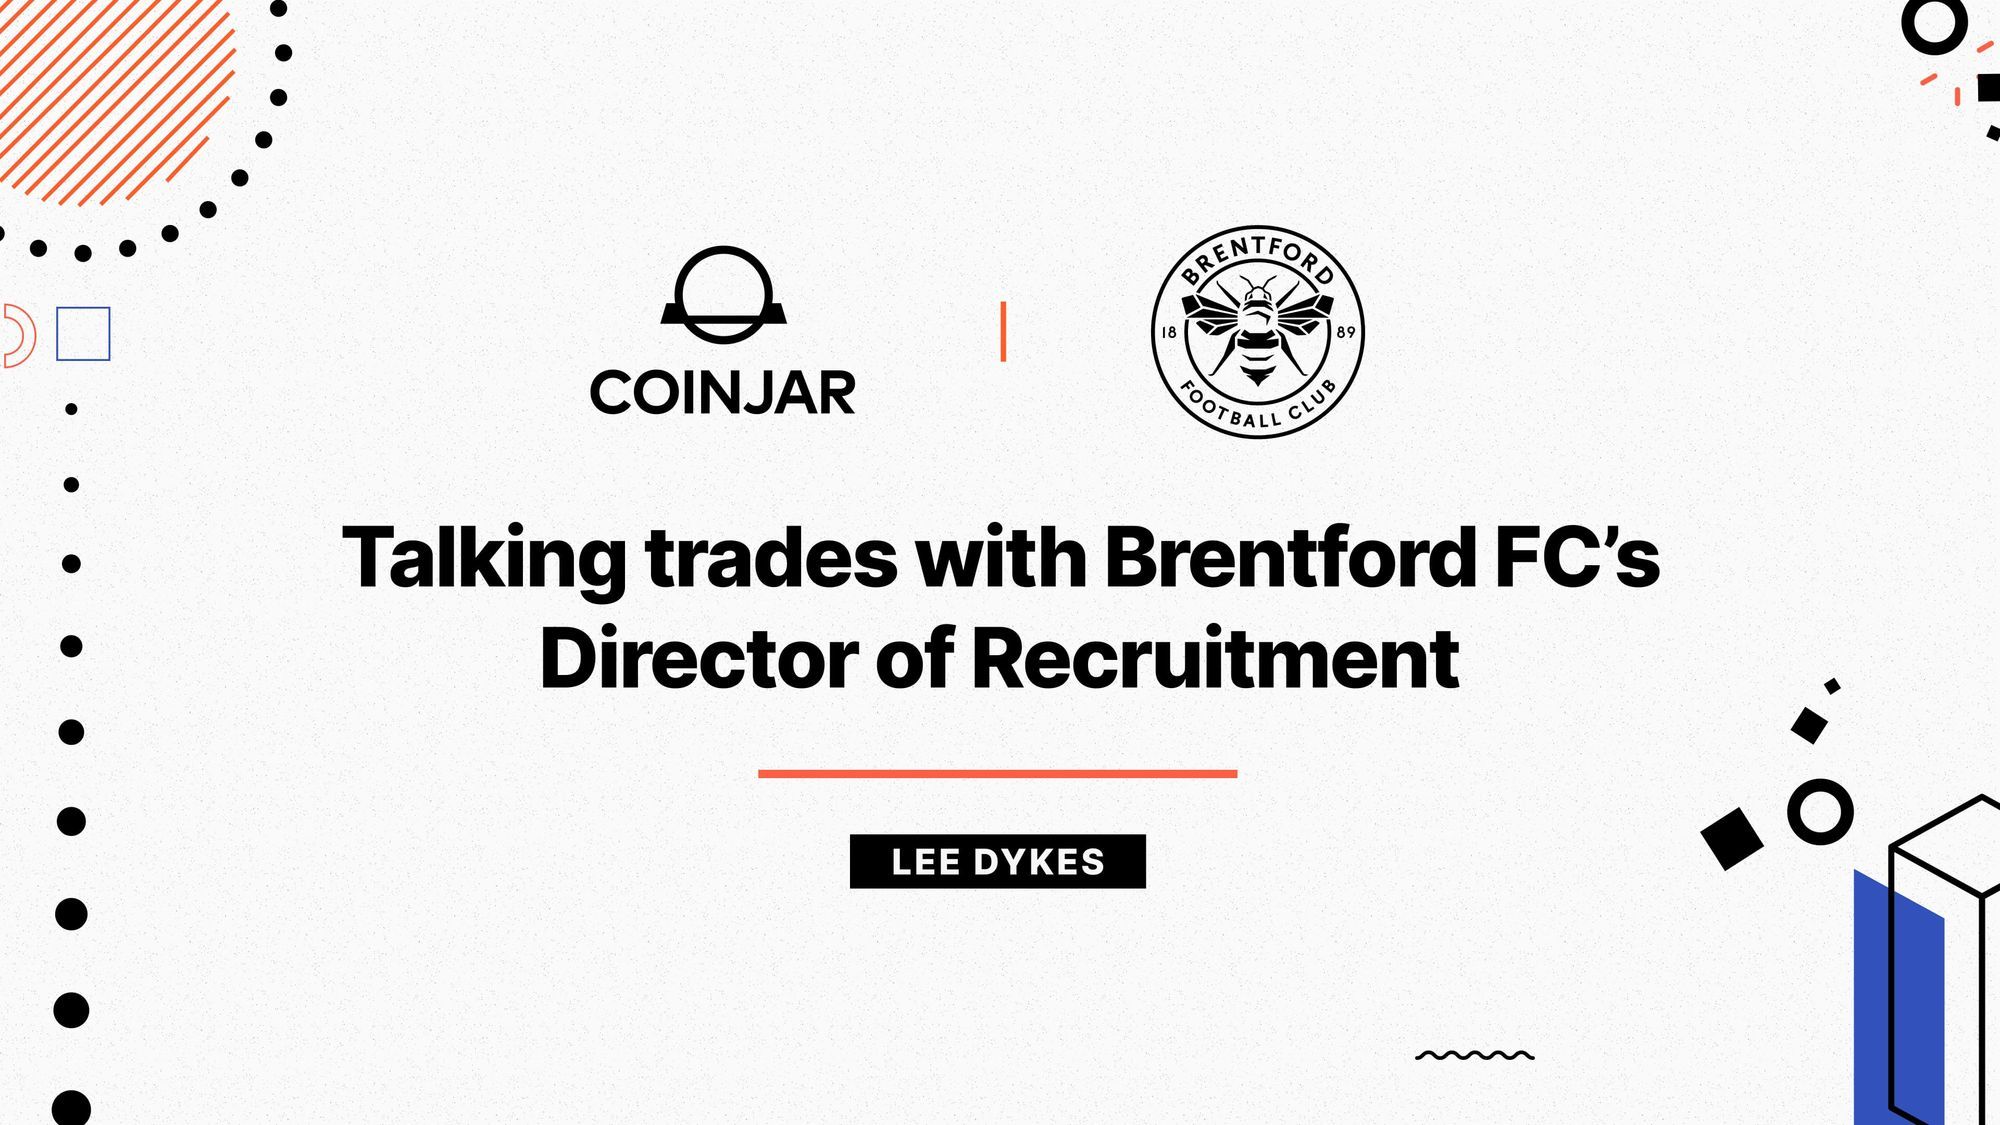 Talking trades with Brentford FC's Director of Recruitment